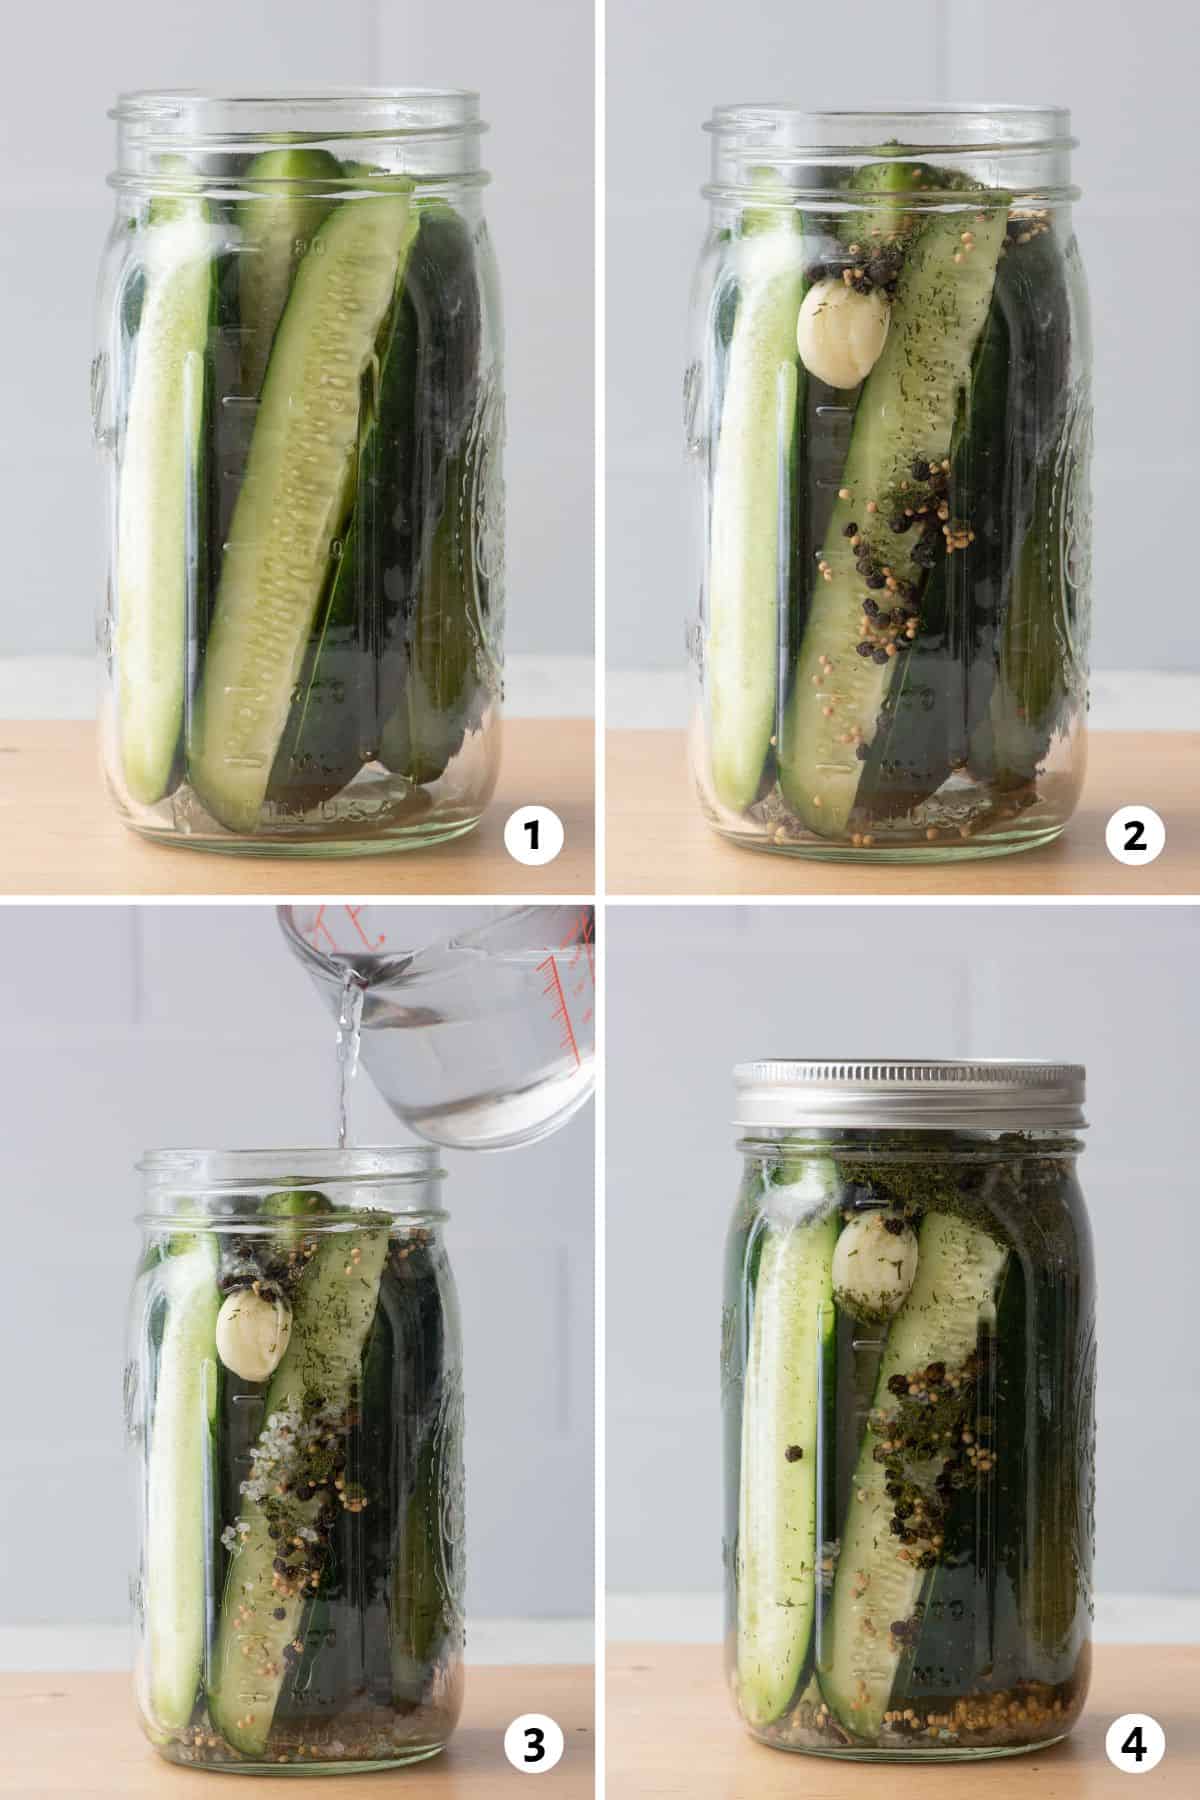 4 image collage preparing recipe: 1- cucumber spears inside jar, 2- garlic, seeds, and spices added, 3- hot brine being poured into jar, 4- jars sealed with lid.